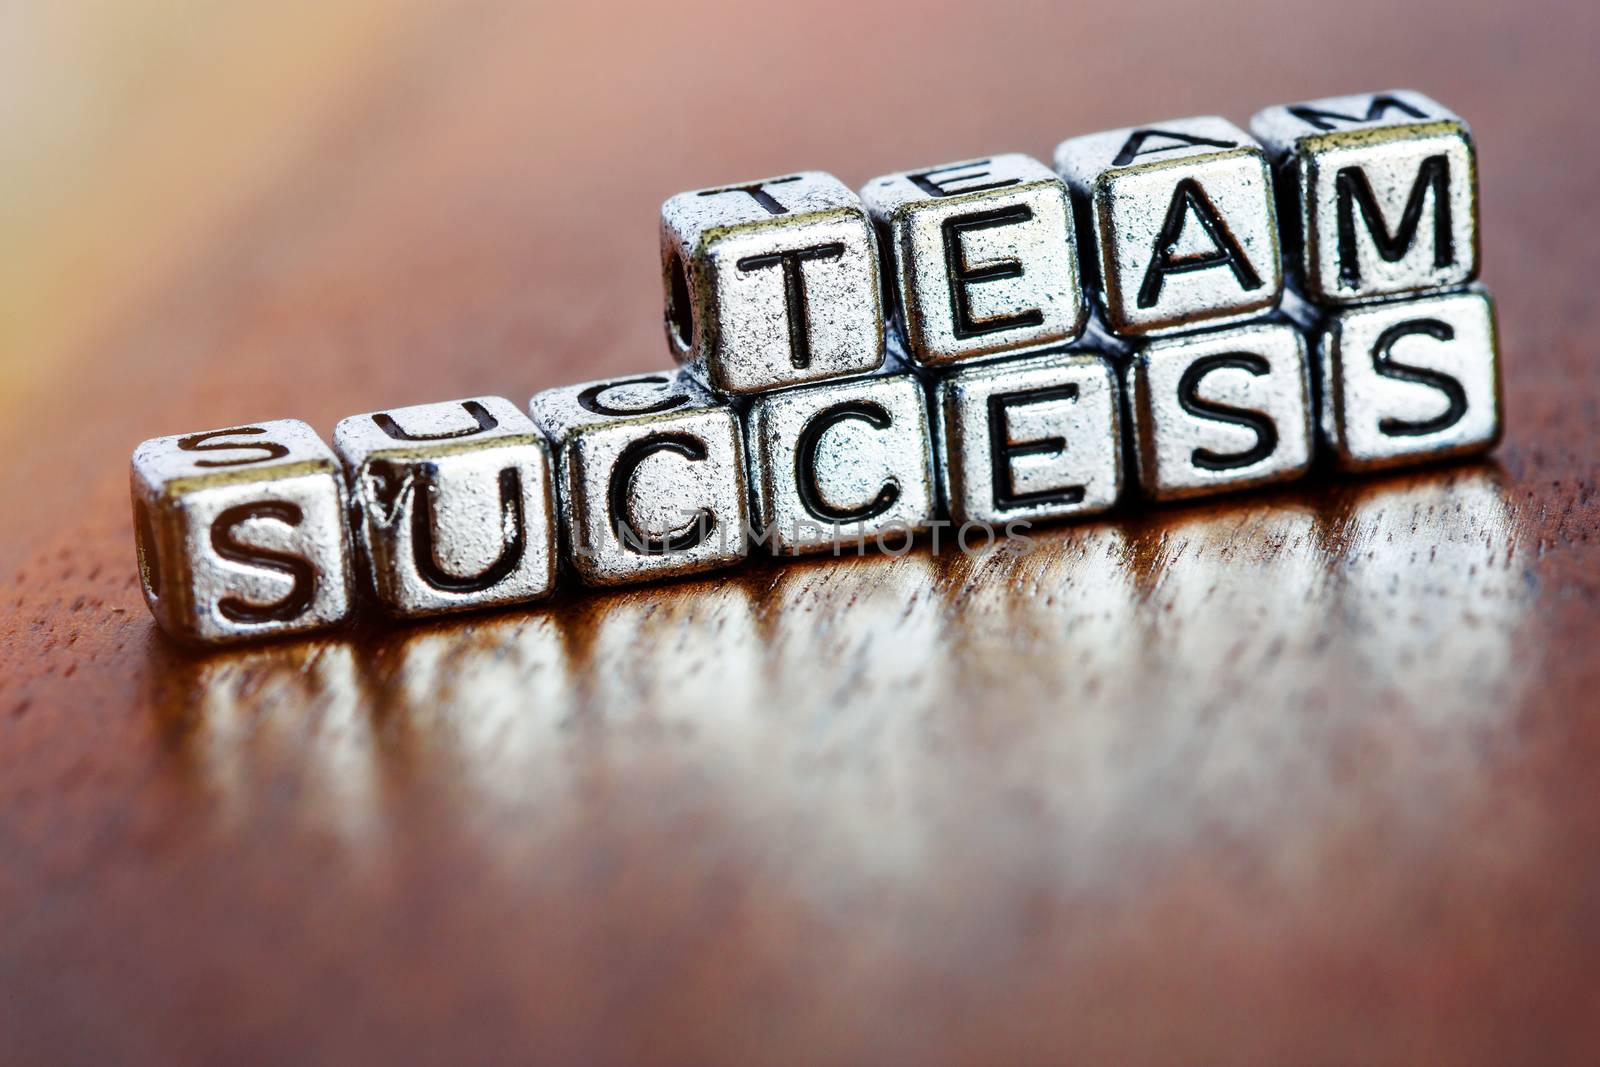 team success business letters on arrange small metal pieces by pixinoo